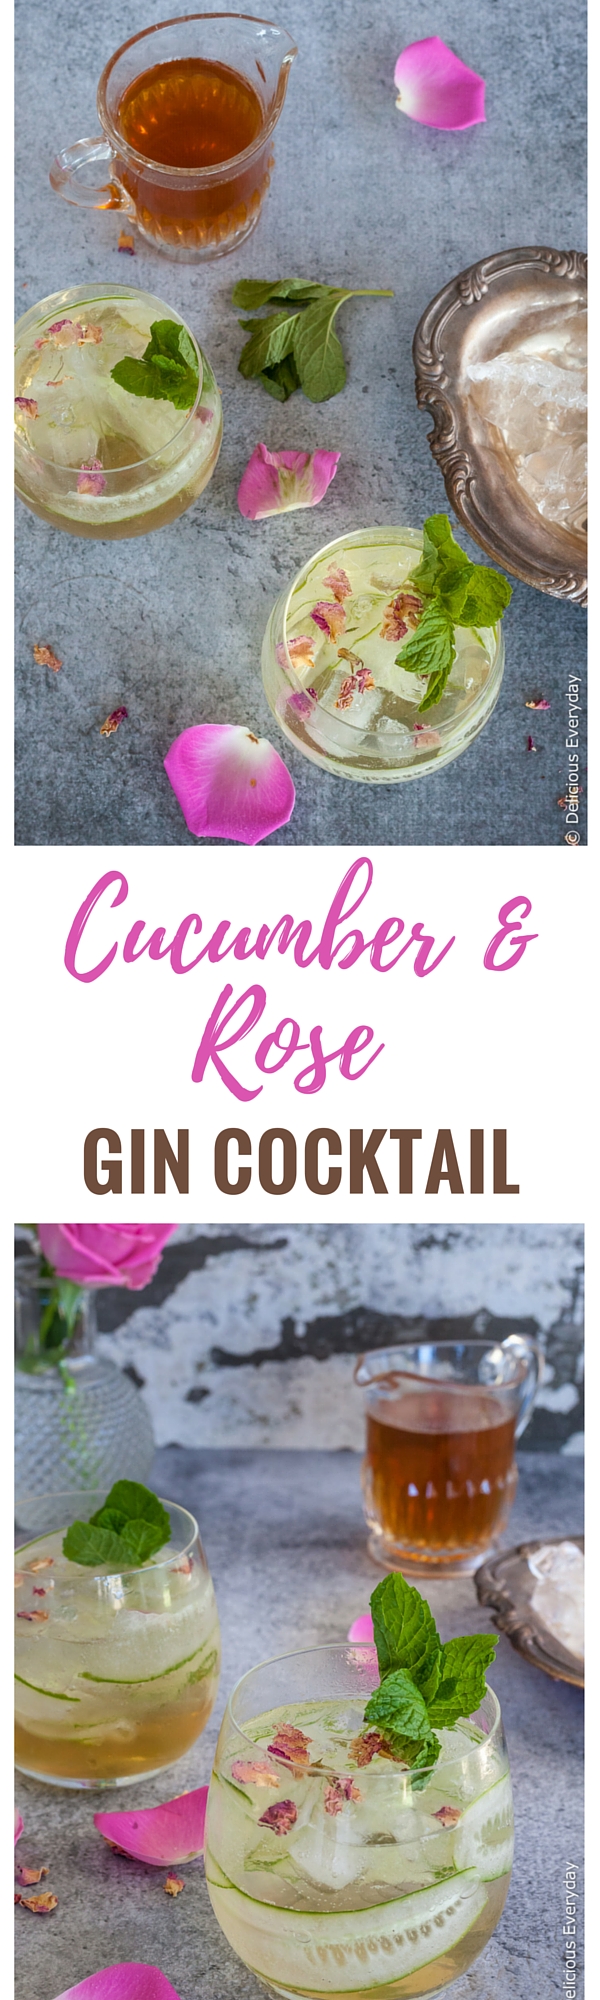 This delicately perfumed light, fizzy Rose and Cucumber Collins cocktail is a perfect pre-dinner sipper. With refreshing cucumber and a homemade rosewater syrup it is the perfect compliment to aromatic gin.